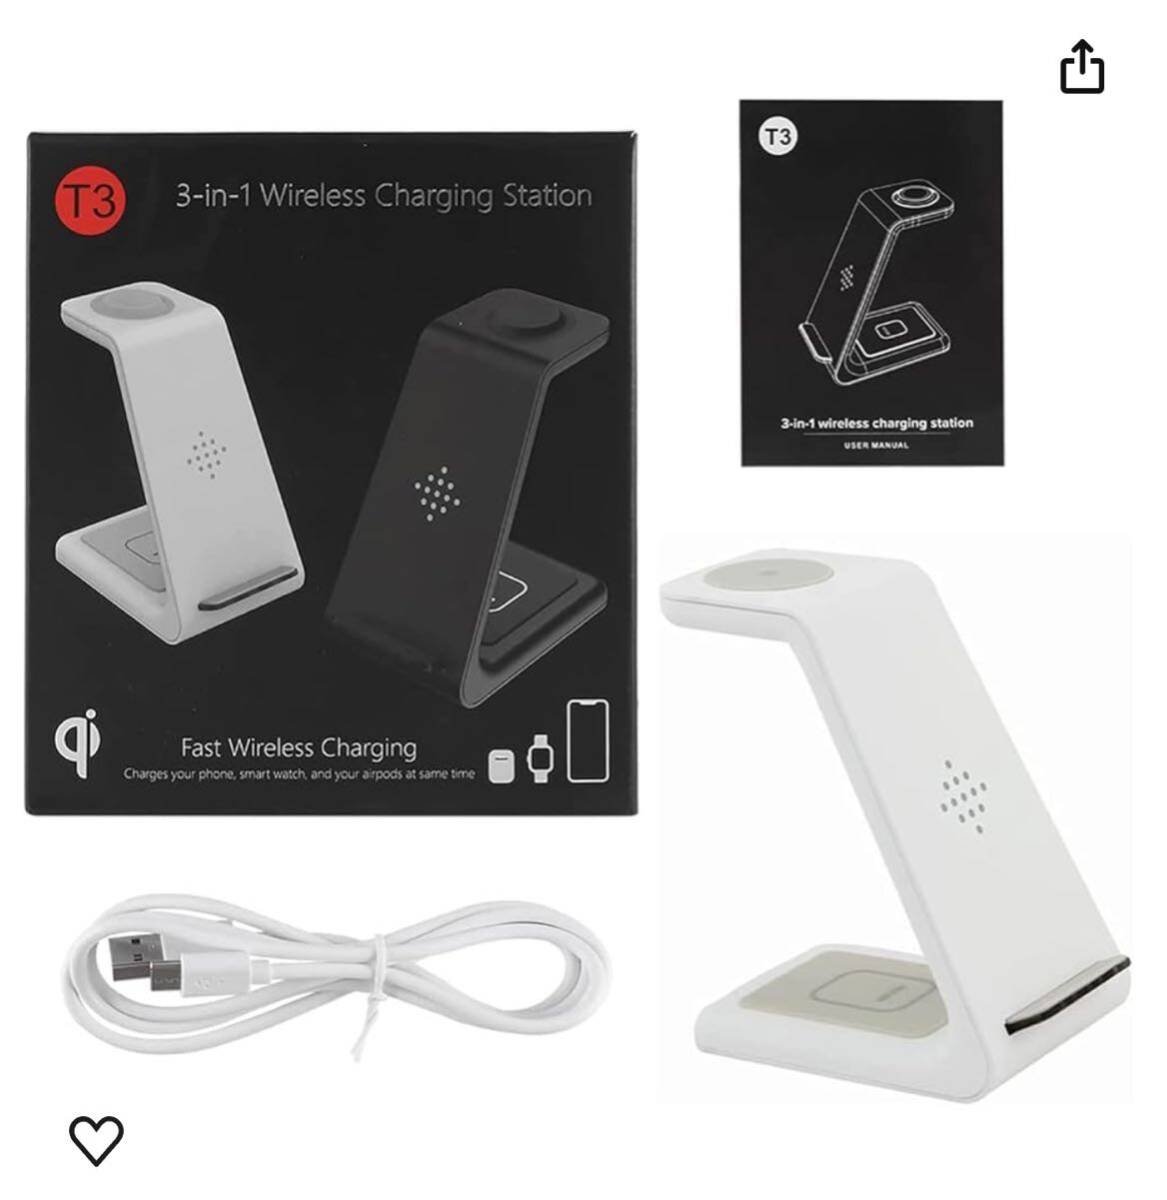 UMEMORY 3-in-1 Wireless Charging Station ワイヤレス充電器 黒_画像8